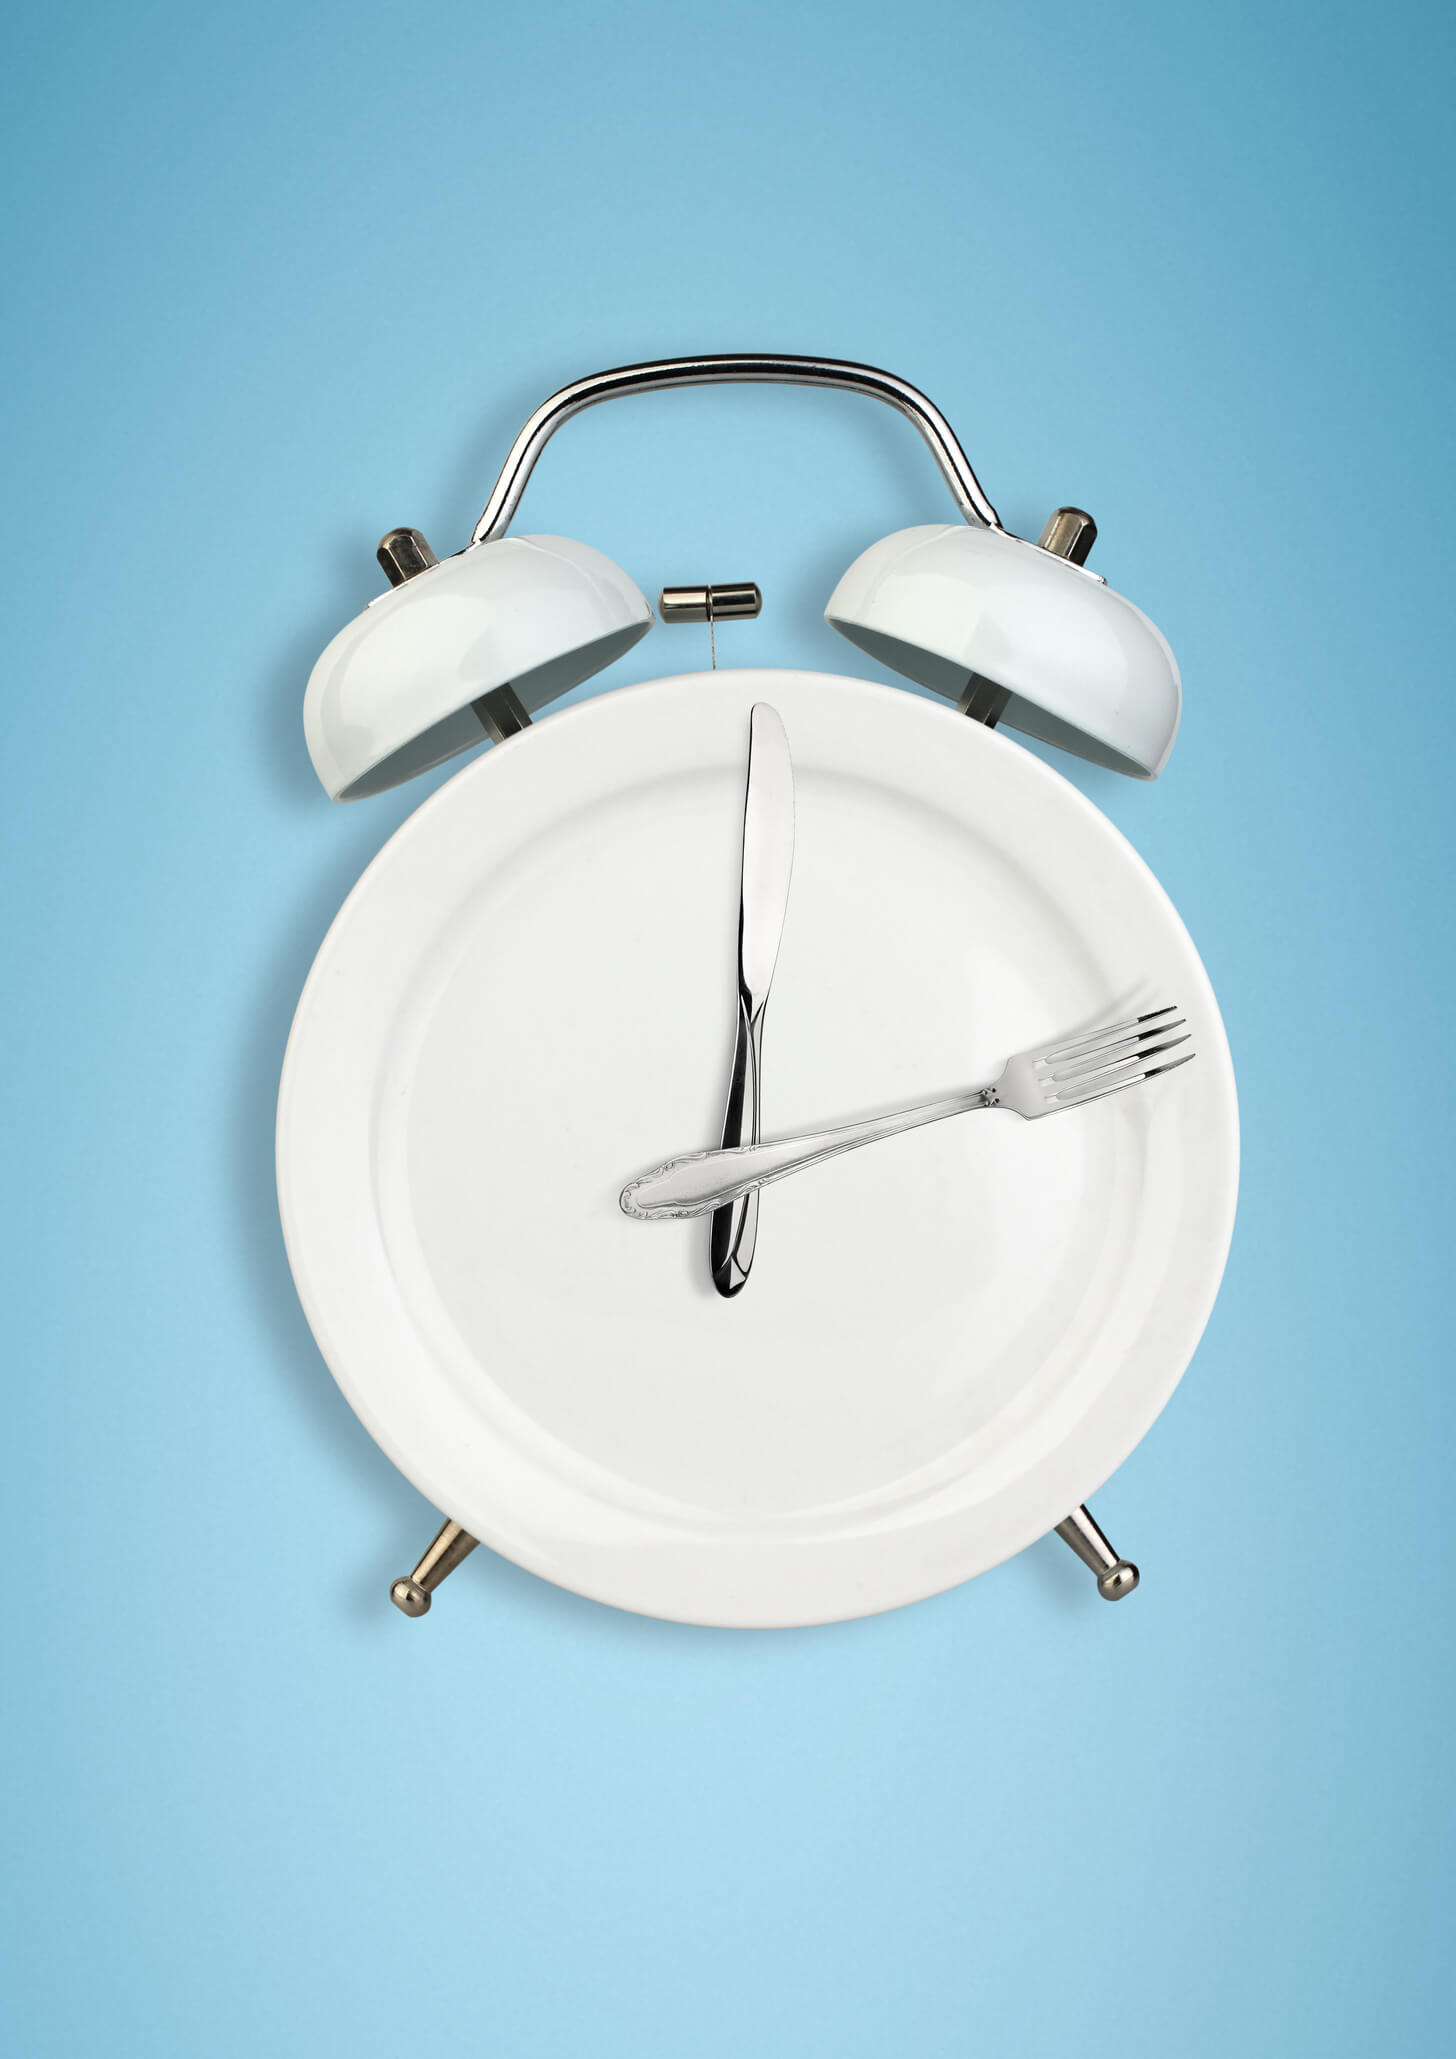 Conceptual image of intermittent fasting.